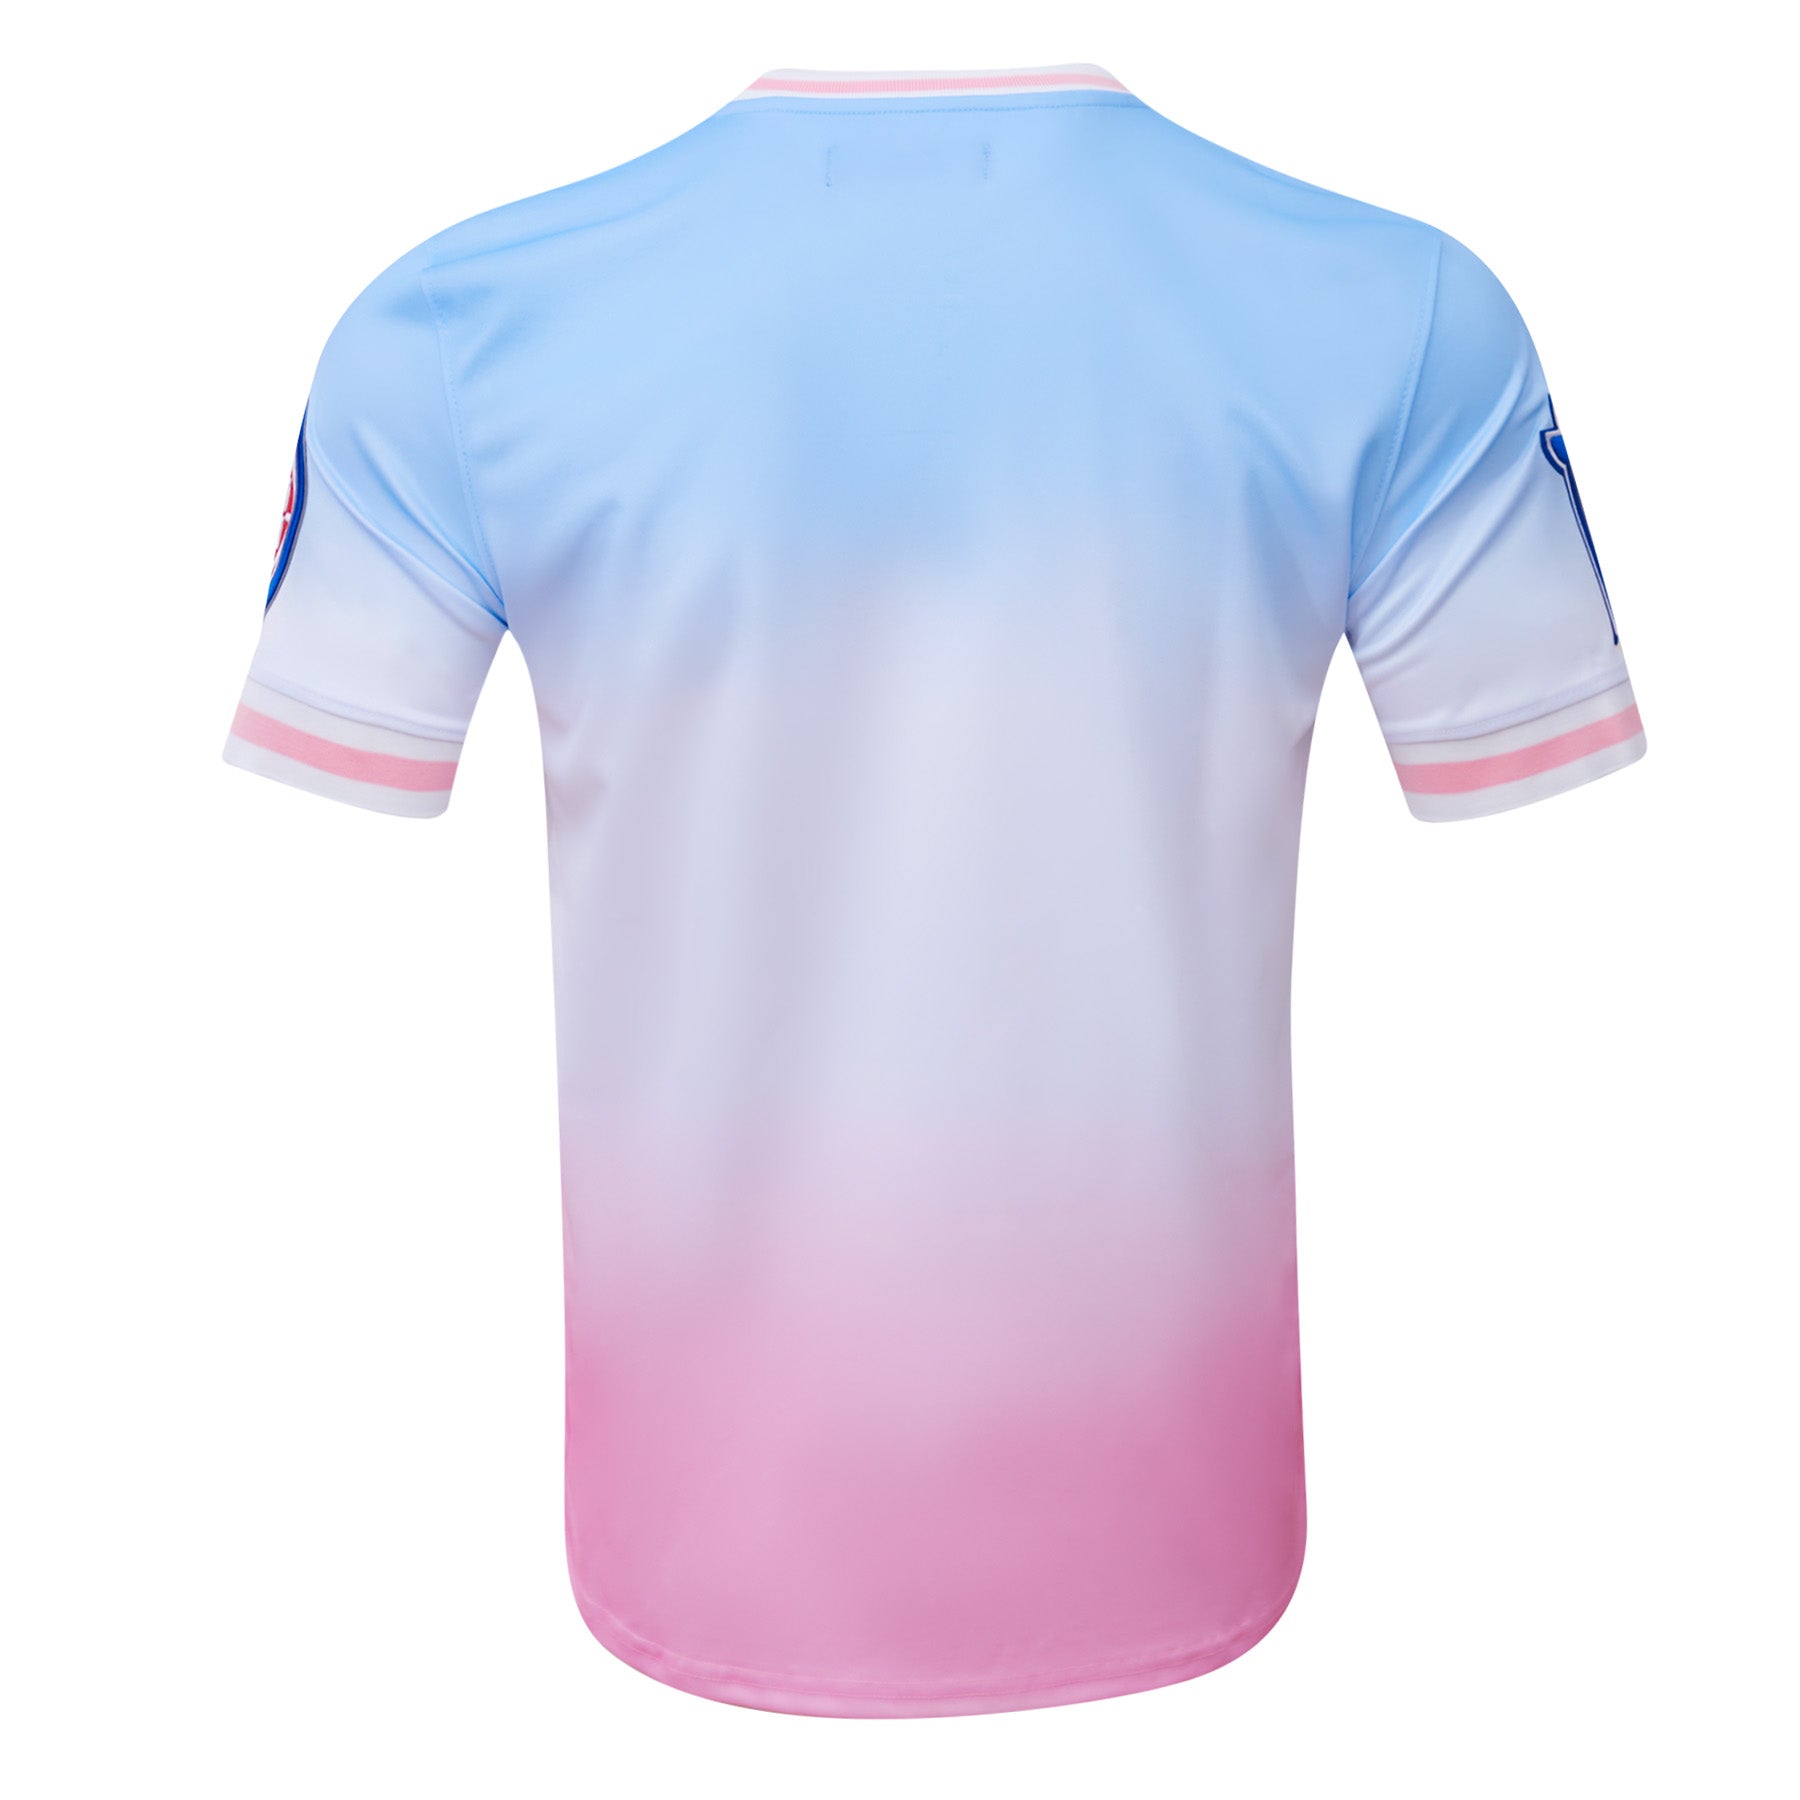 Chicago White Sox Pro Standard Ombre T-Shirt - Blue/Pink